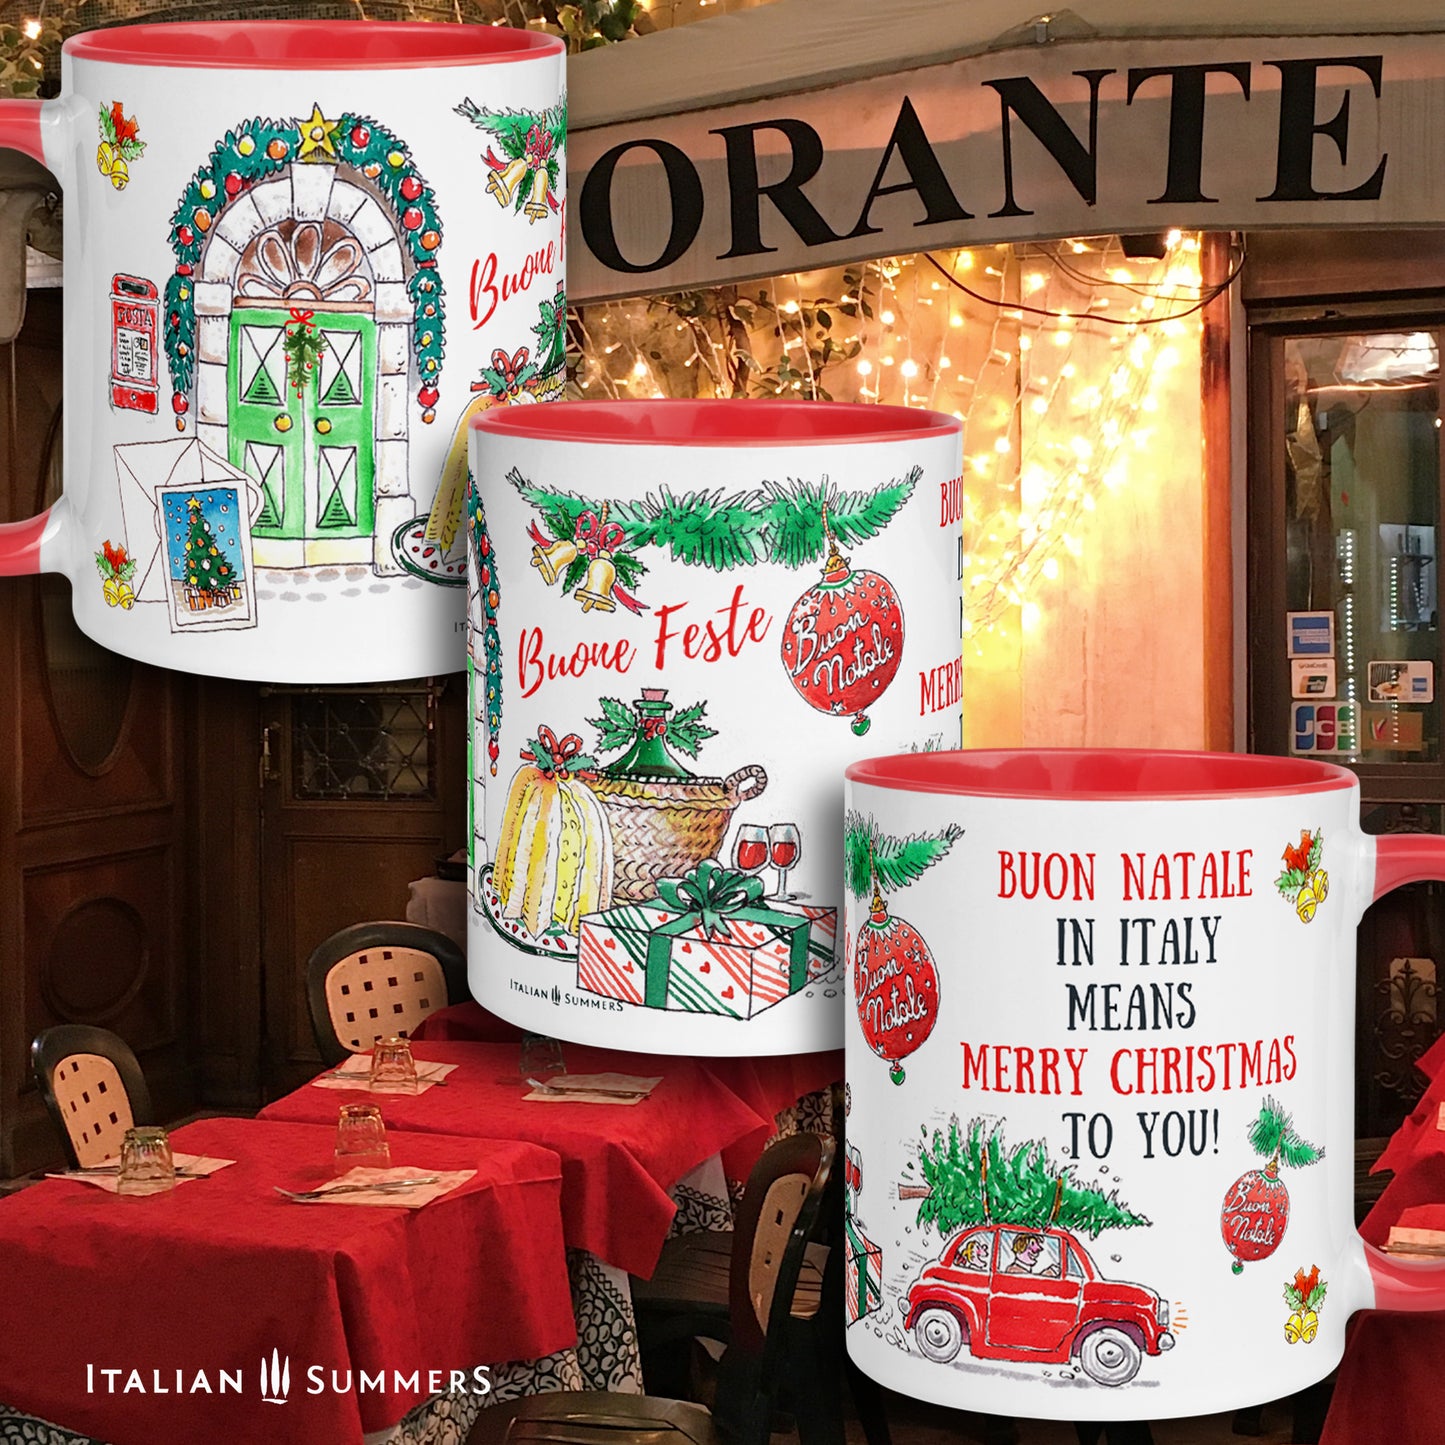 Italy Christmas mug With a charming Italian-inspired design featuring all the traditional trimmings of an Italian Christmas, it'll have you singing "Santa Lucia" in no time! Plus, the quote on the mug reads "Buon Natale in Italy means a Merry Christmas to you", making the perfect gift. Made by Italian Summers copyright by Italian Summers